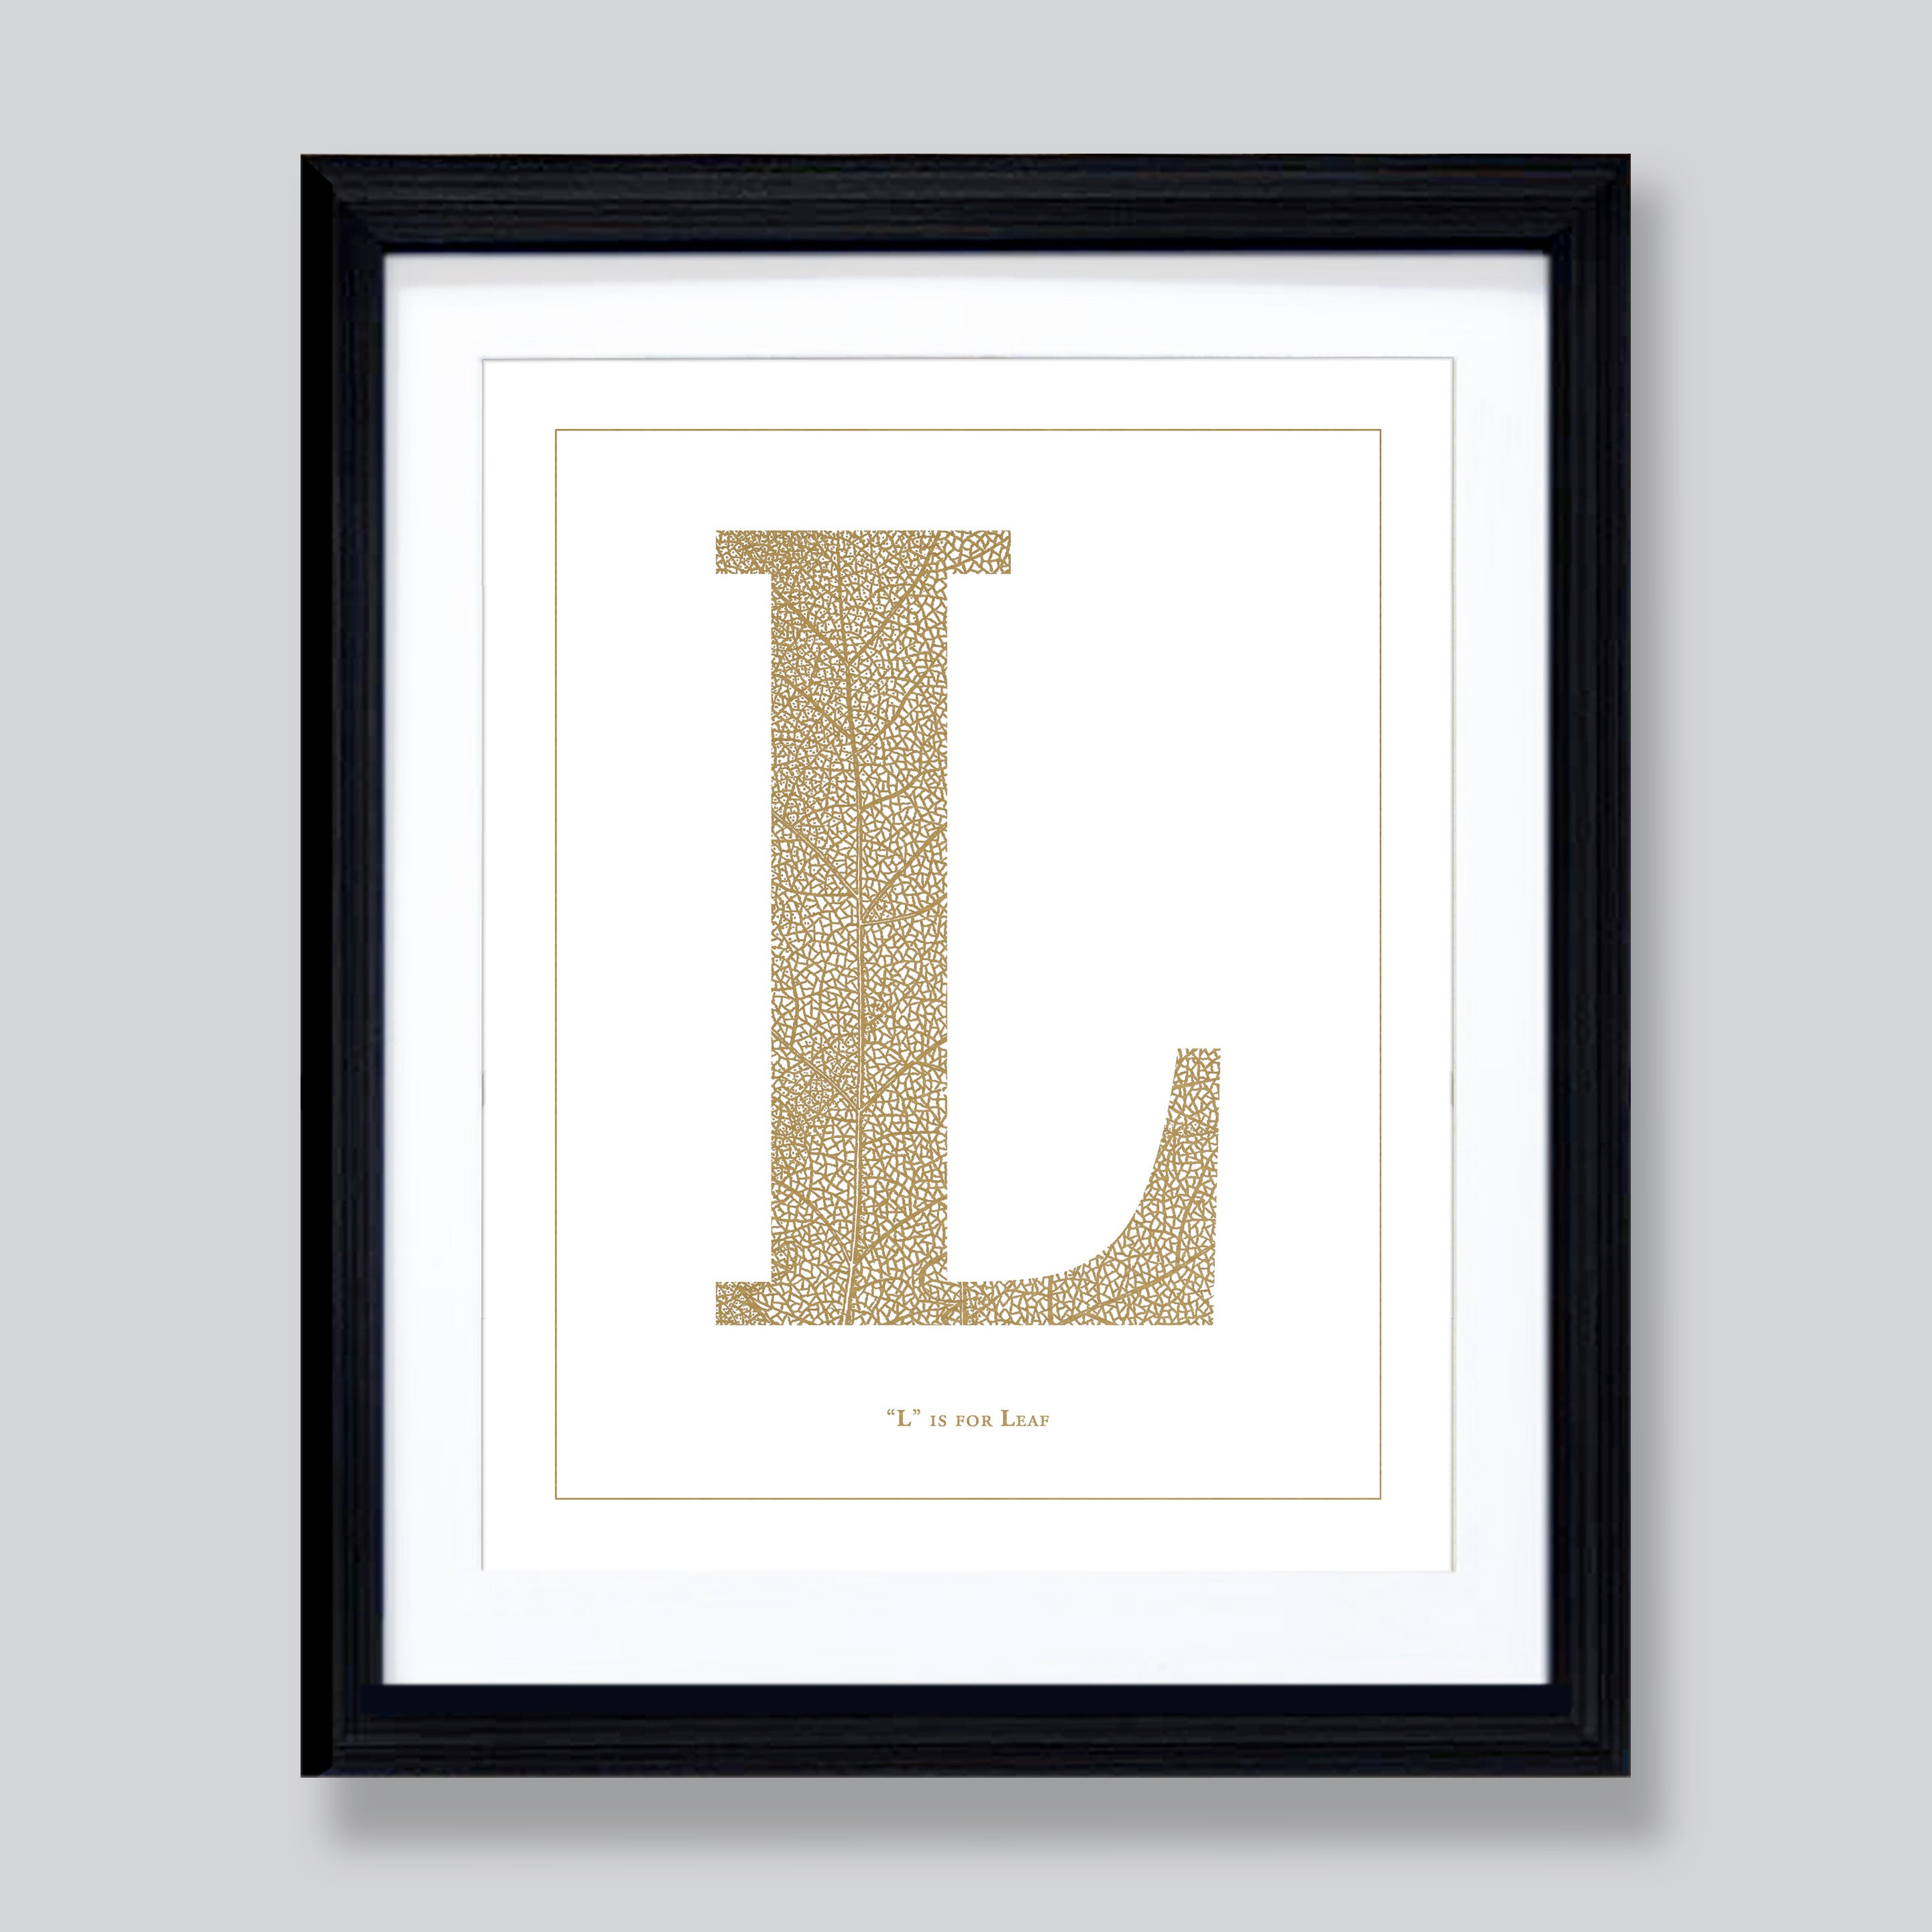 "L" is for Leaf